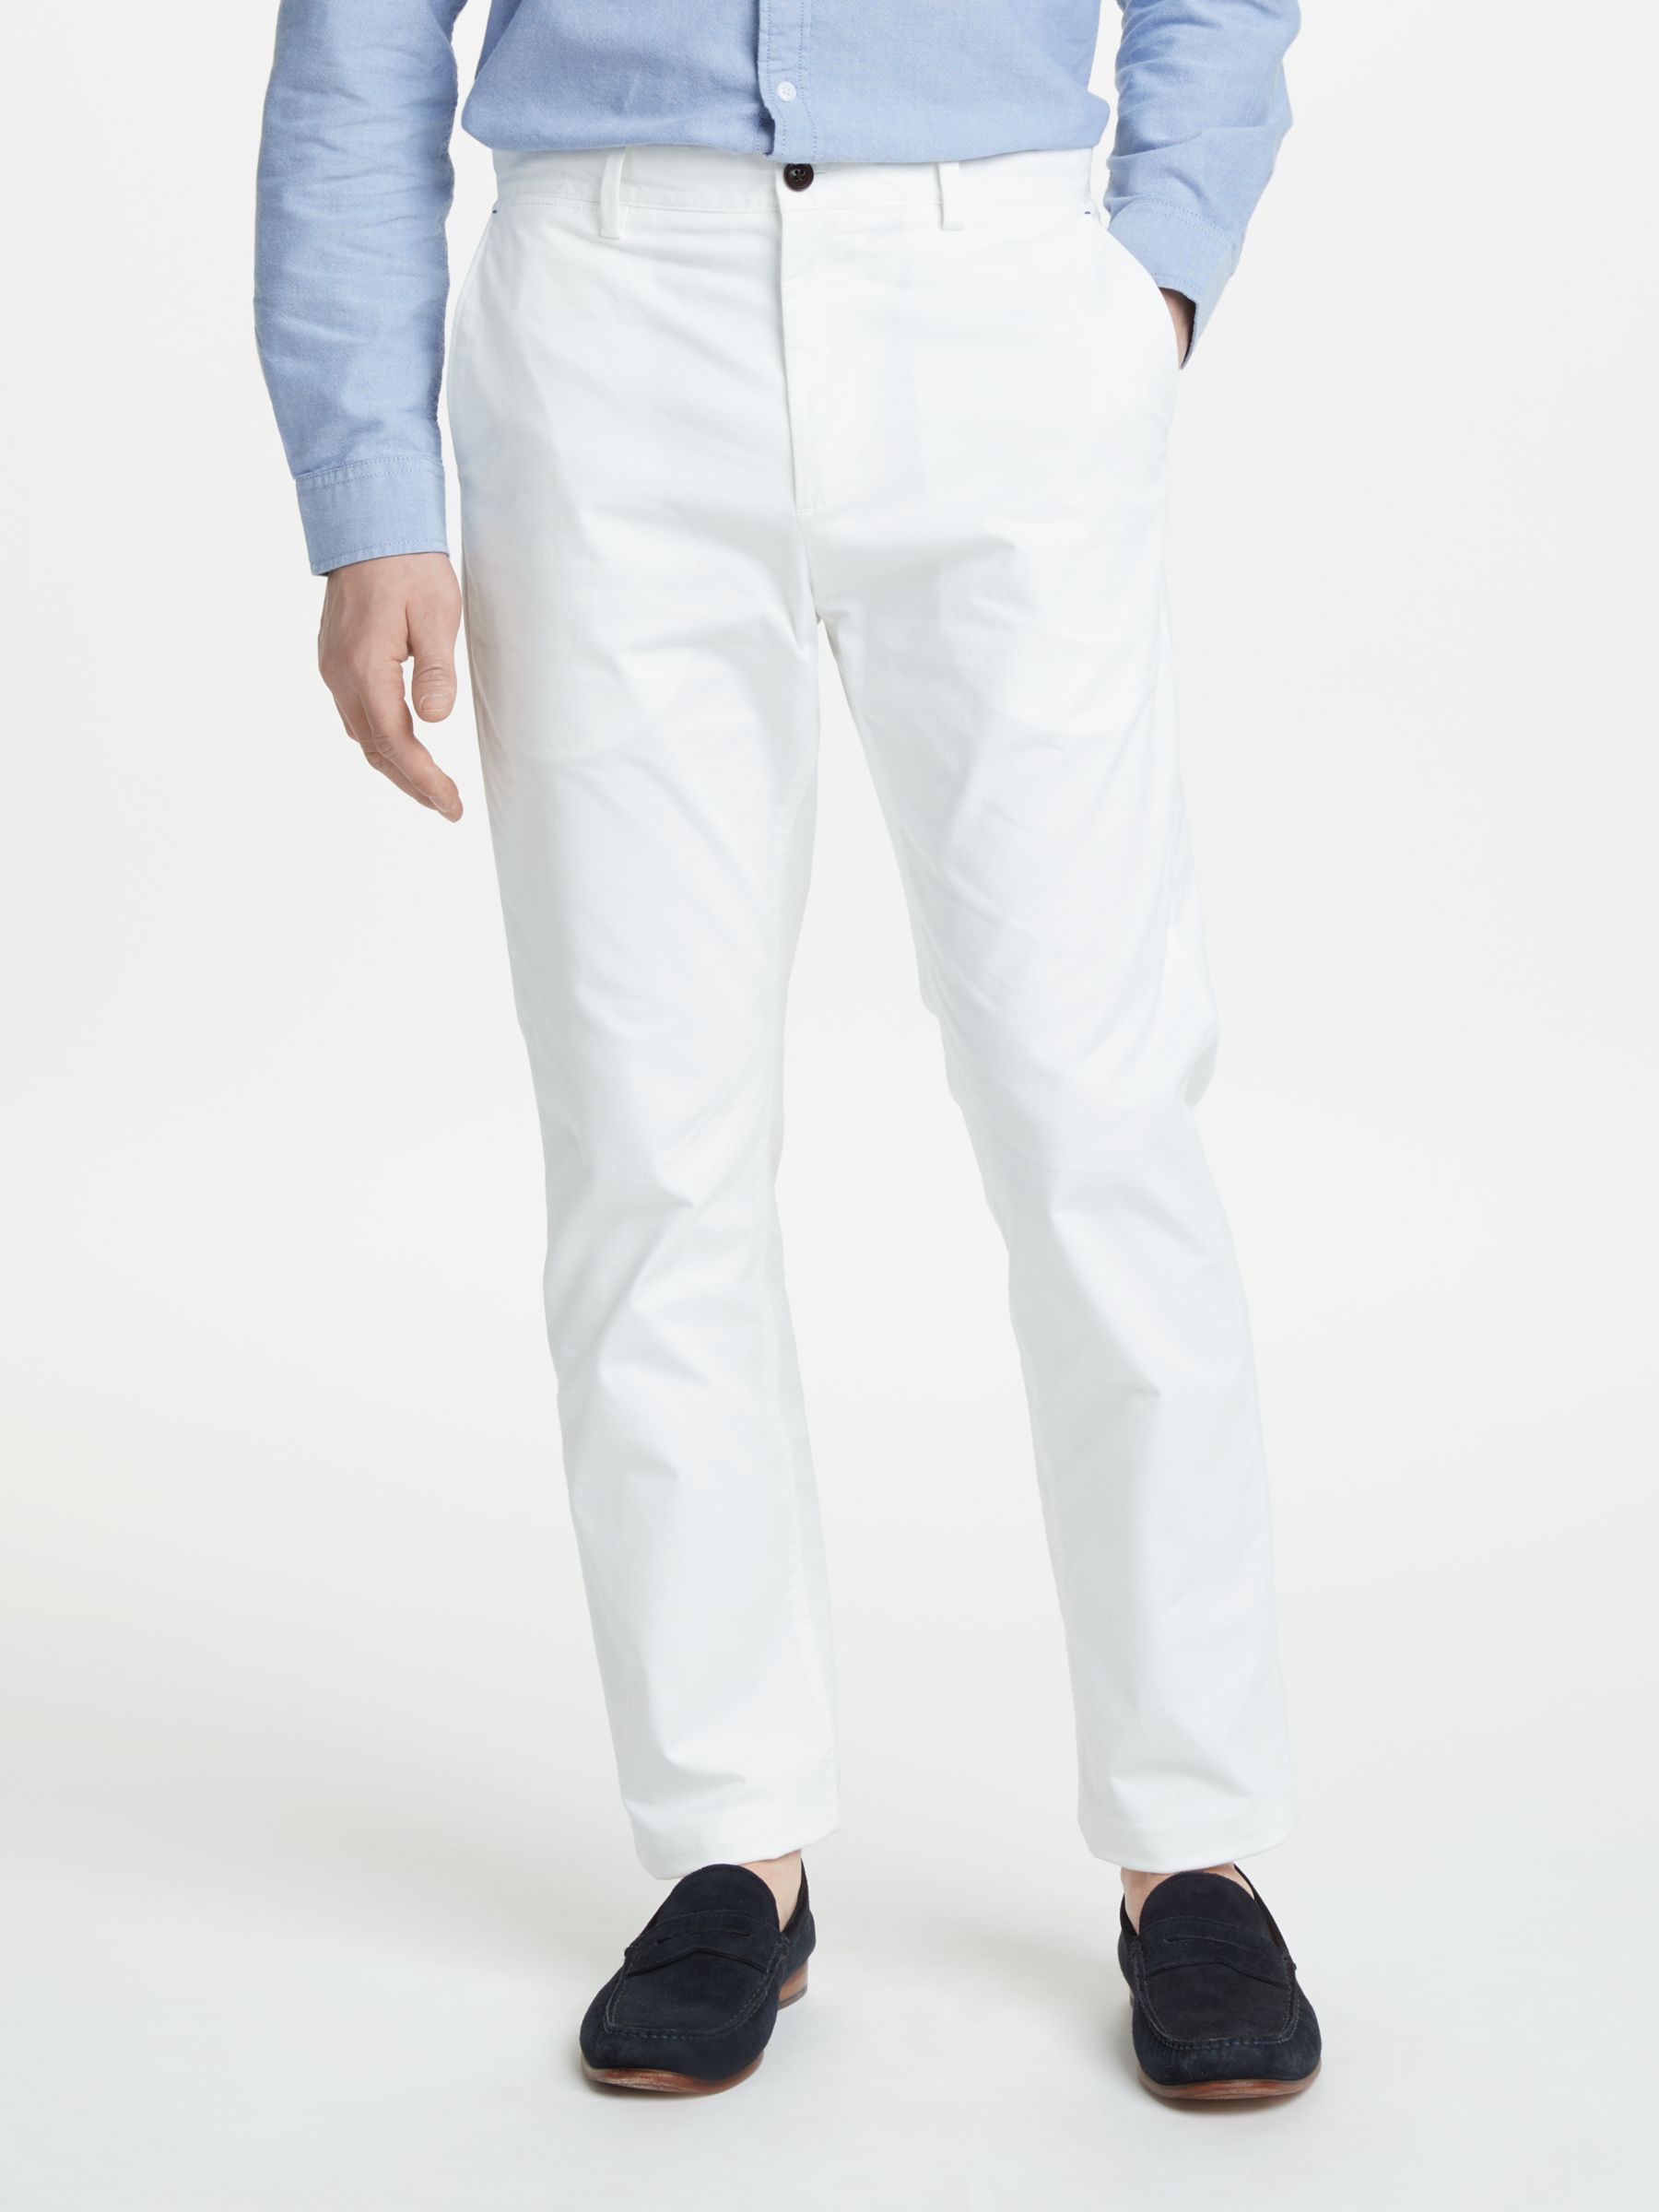 John Lewis & Partners Essential Chinos, White, 34S